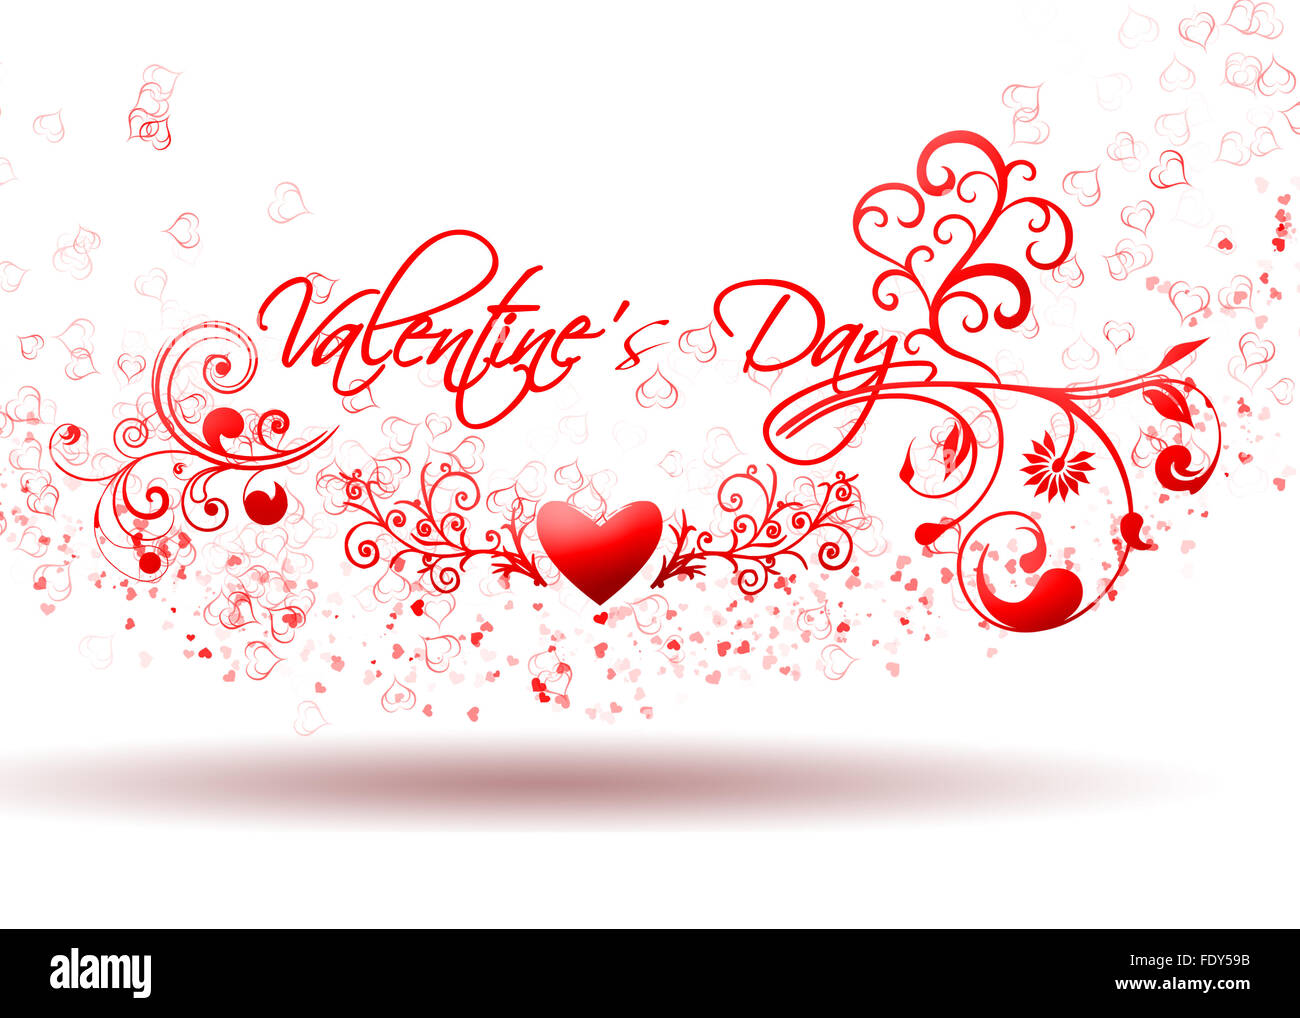 Drawing with hearts dedicated to St. Valentine's Day. Illustration. Stock Photo